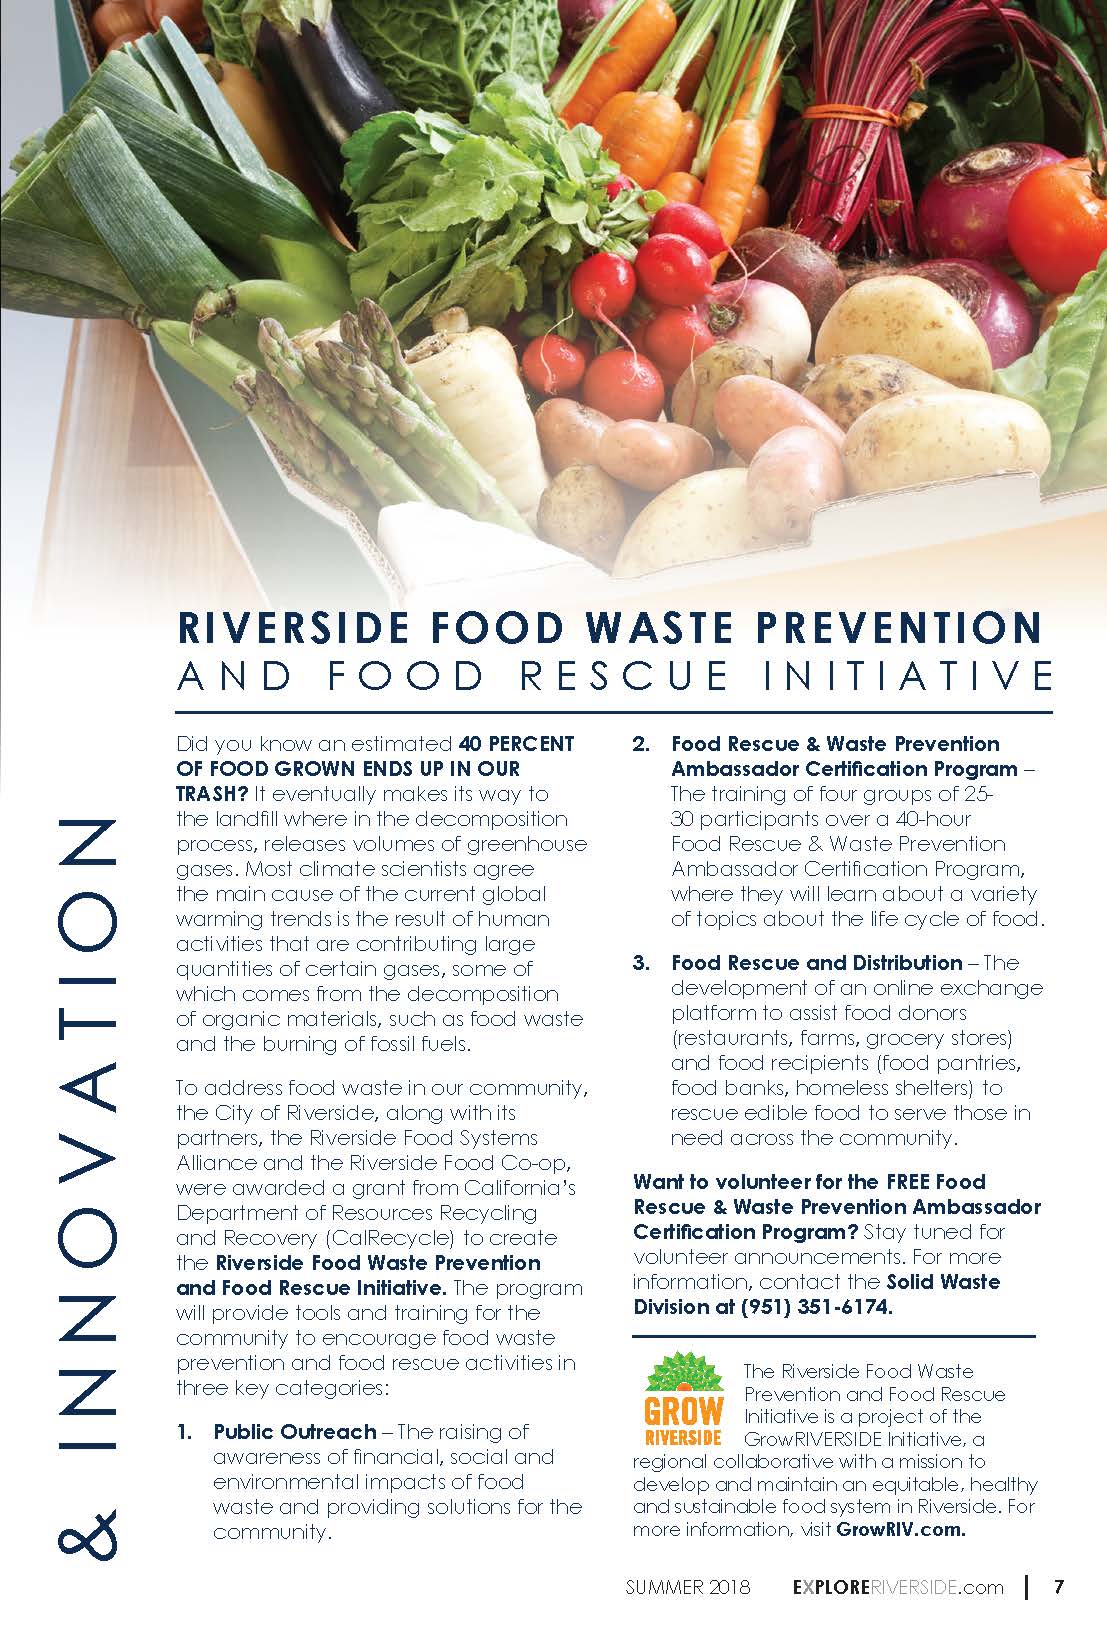 Food Waste Article from Explore Riverside Magazine